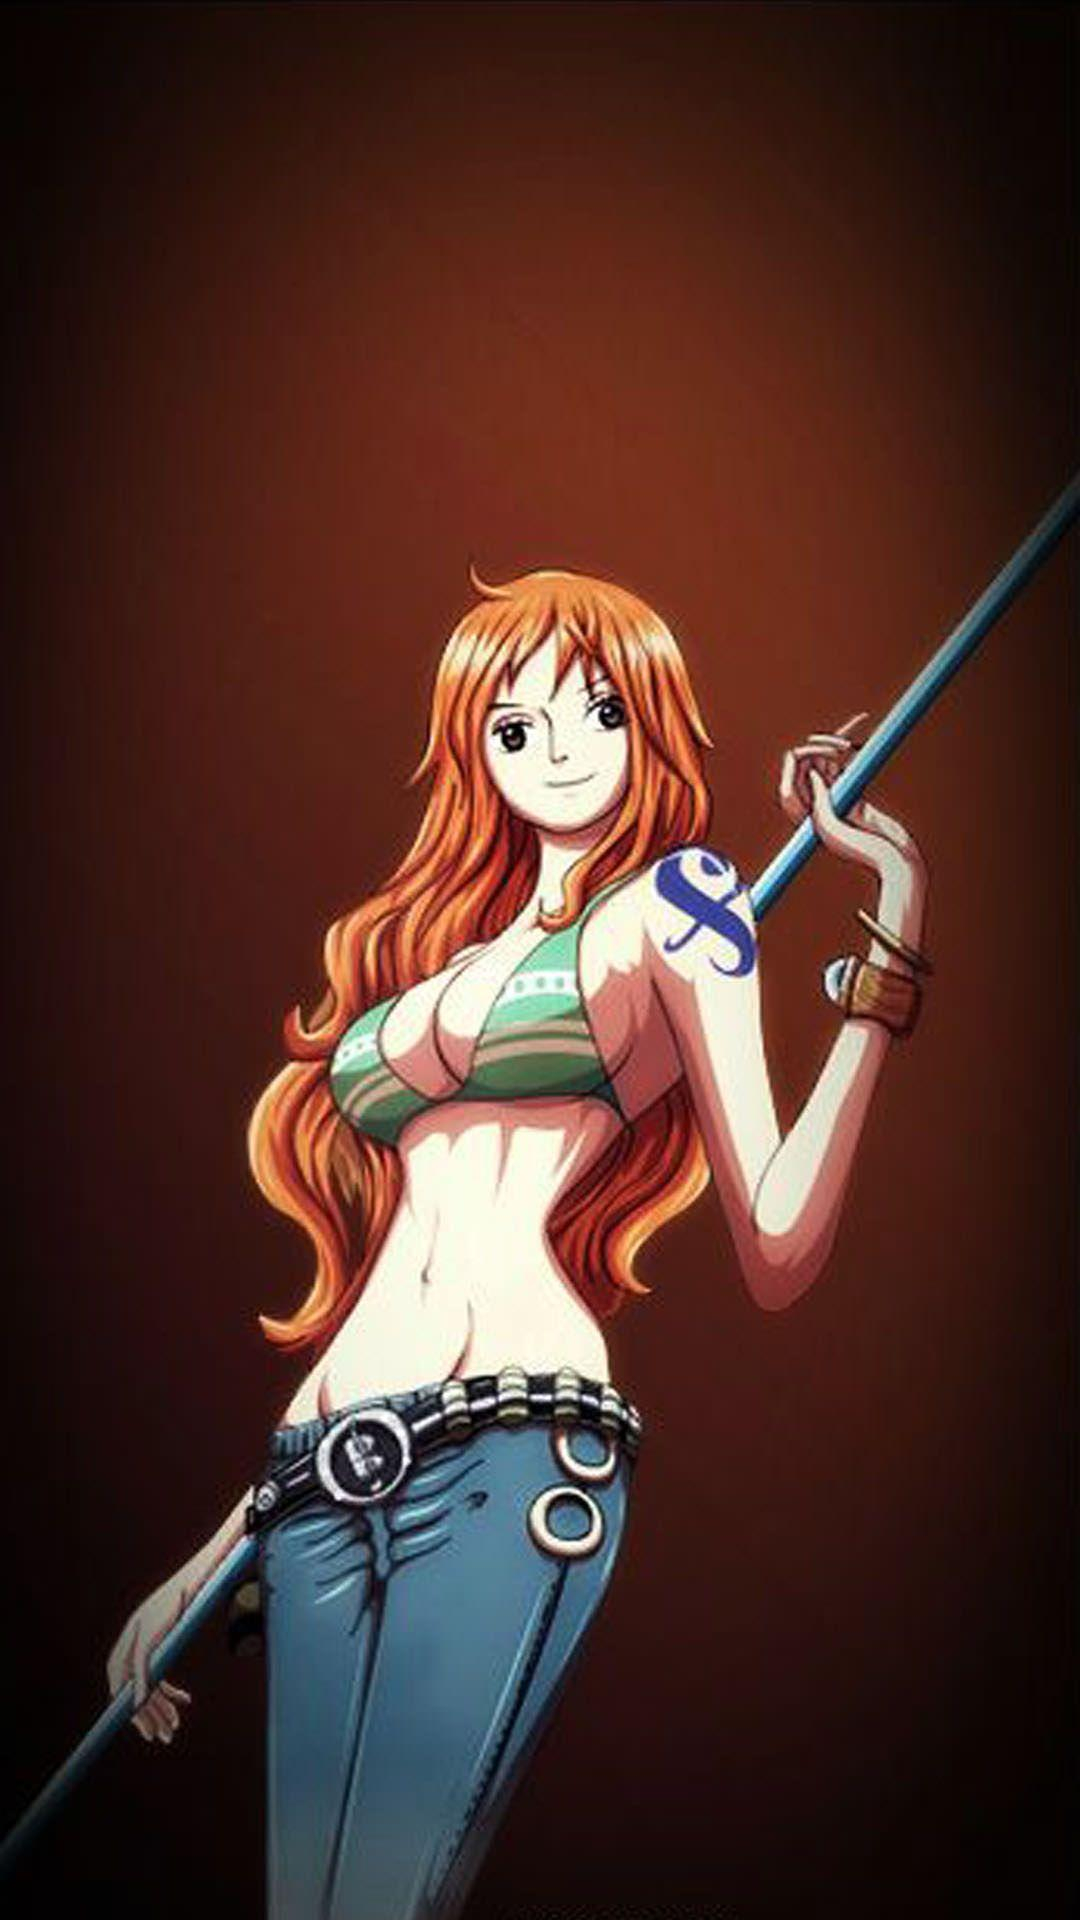 1080x1920 Anime One Piece Nami Wallpapers